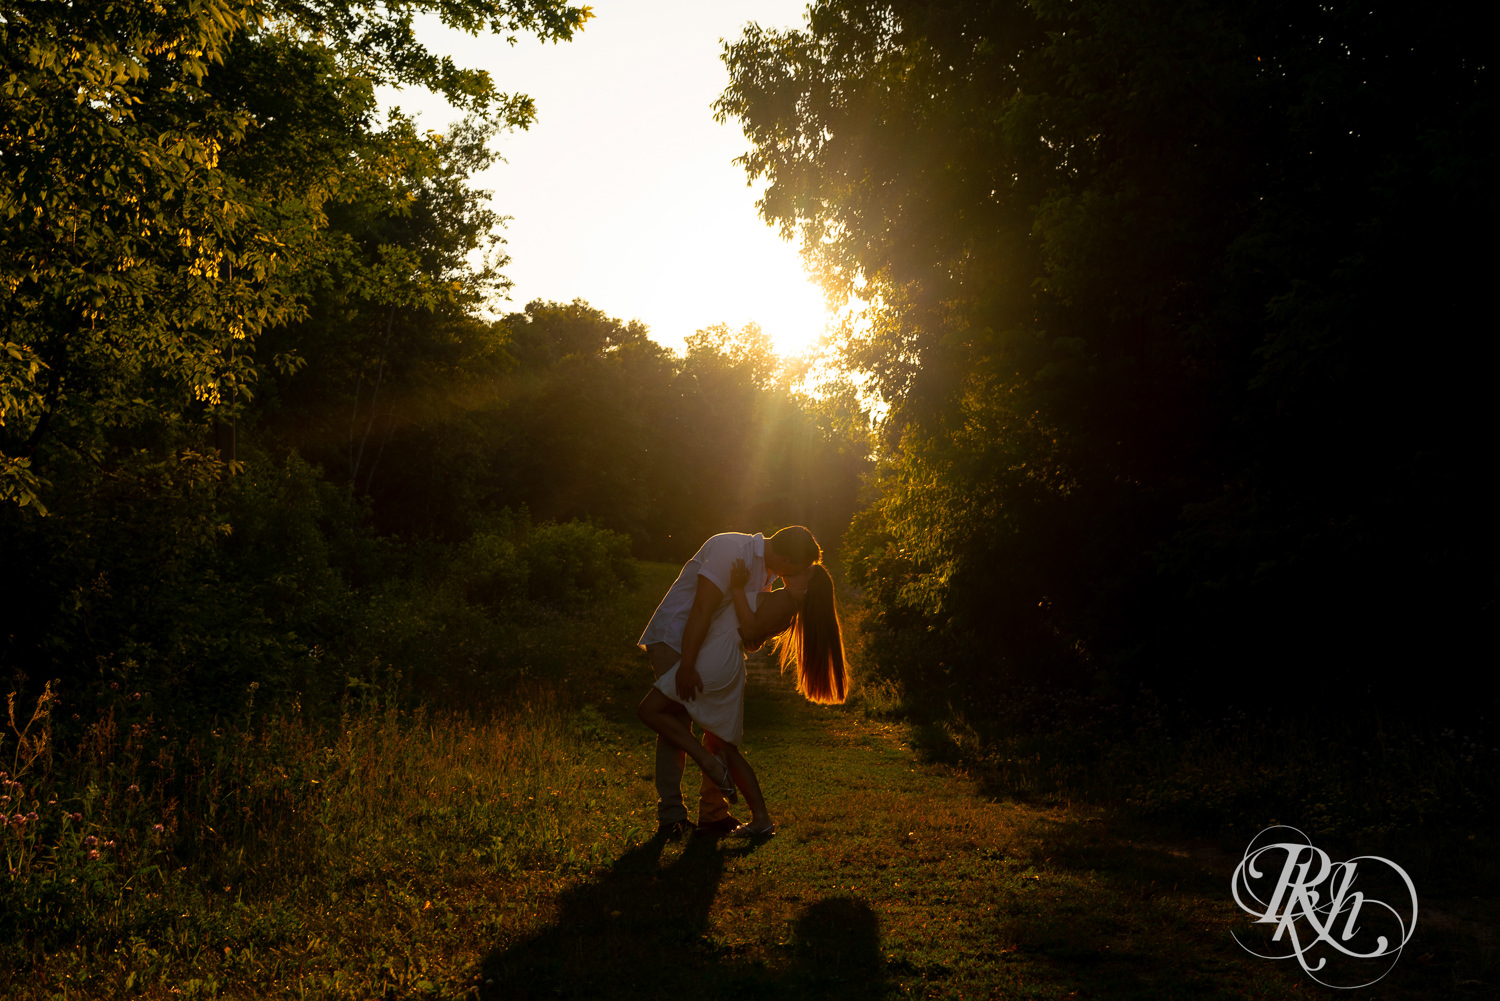 Man in white shirt and woman in white dress kiss during golden hour engagement photography at Lebanon Hills in Eagan, Minnesota.